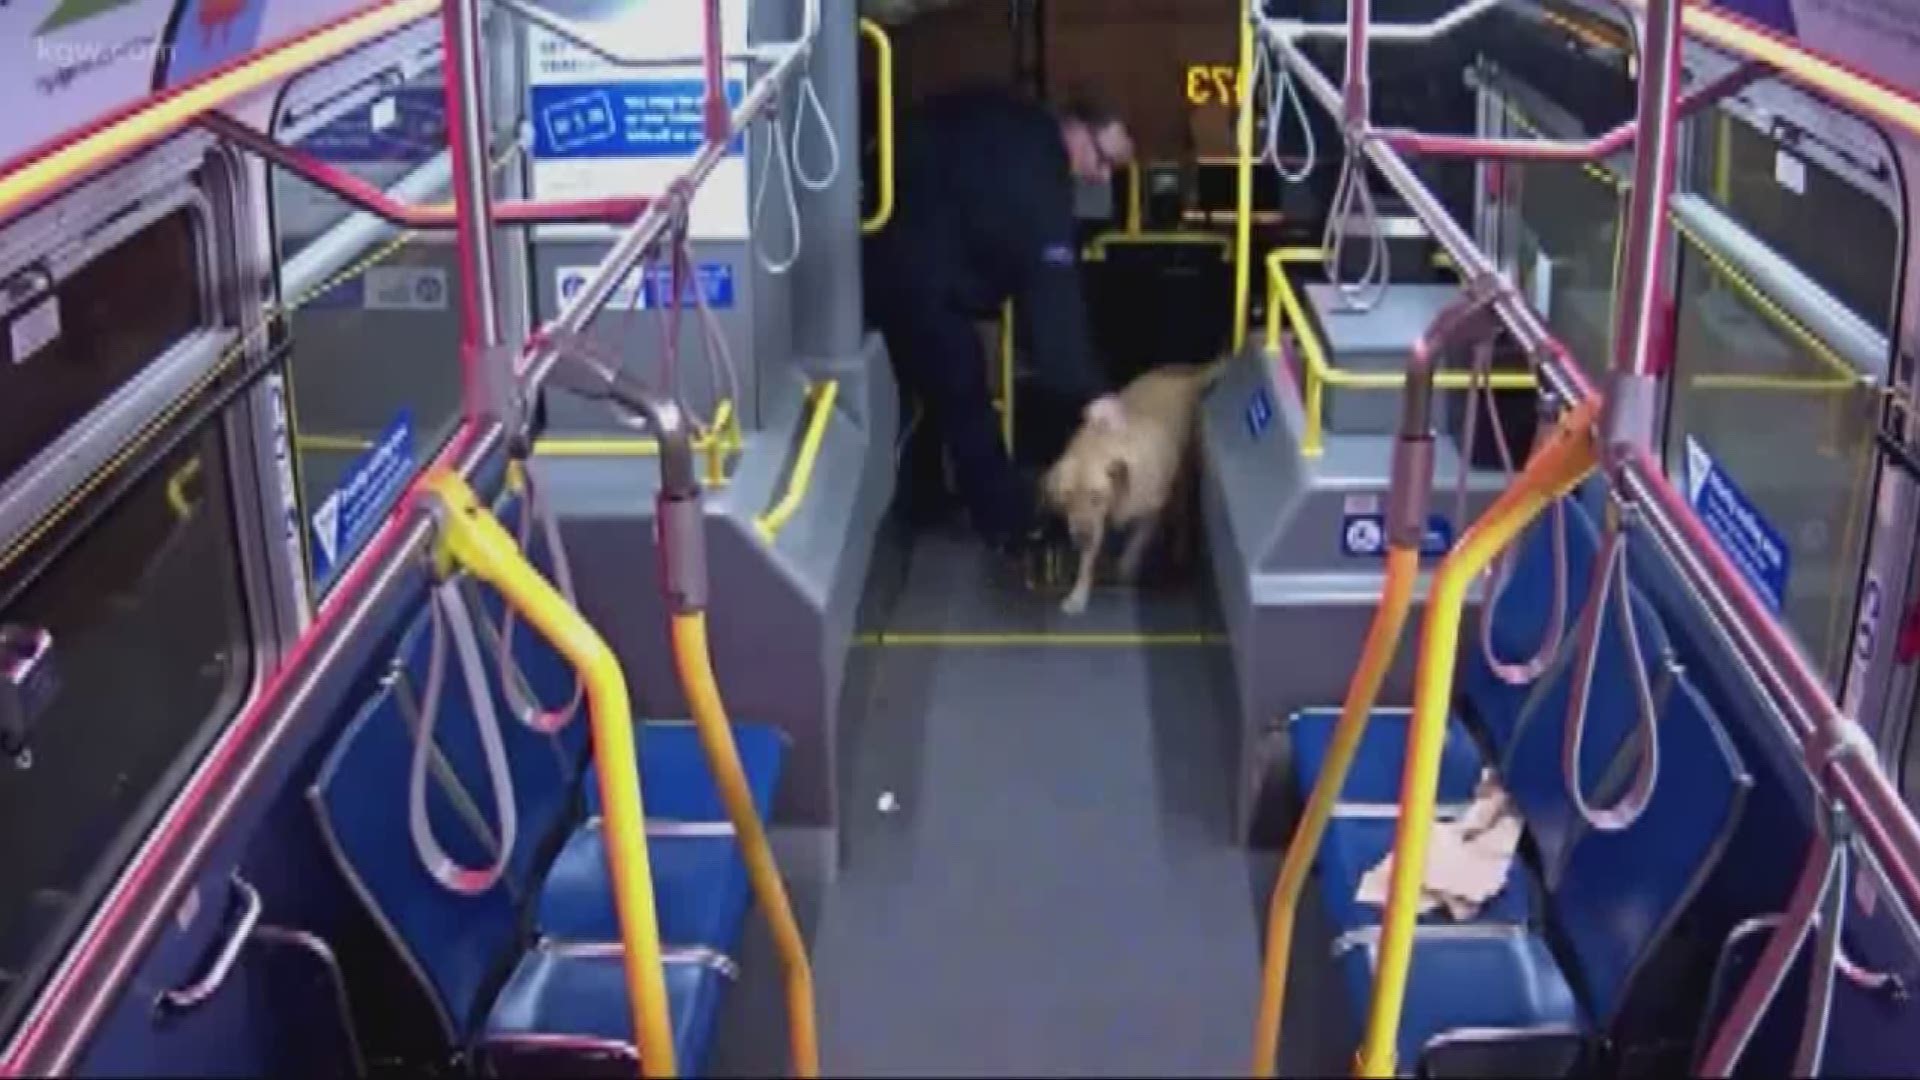 A TriMet bus driver prevented a dog from being stolen.